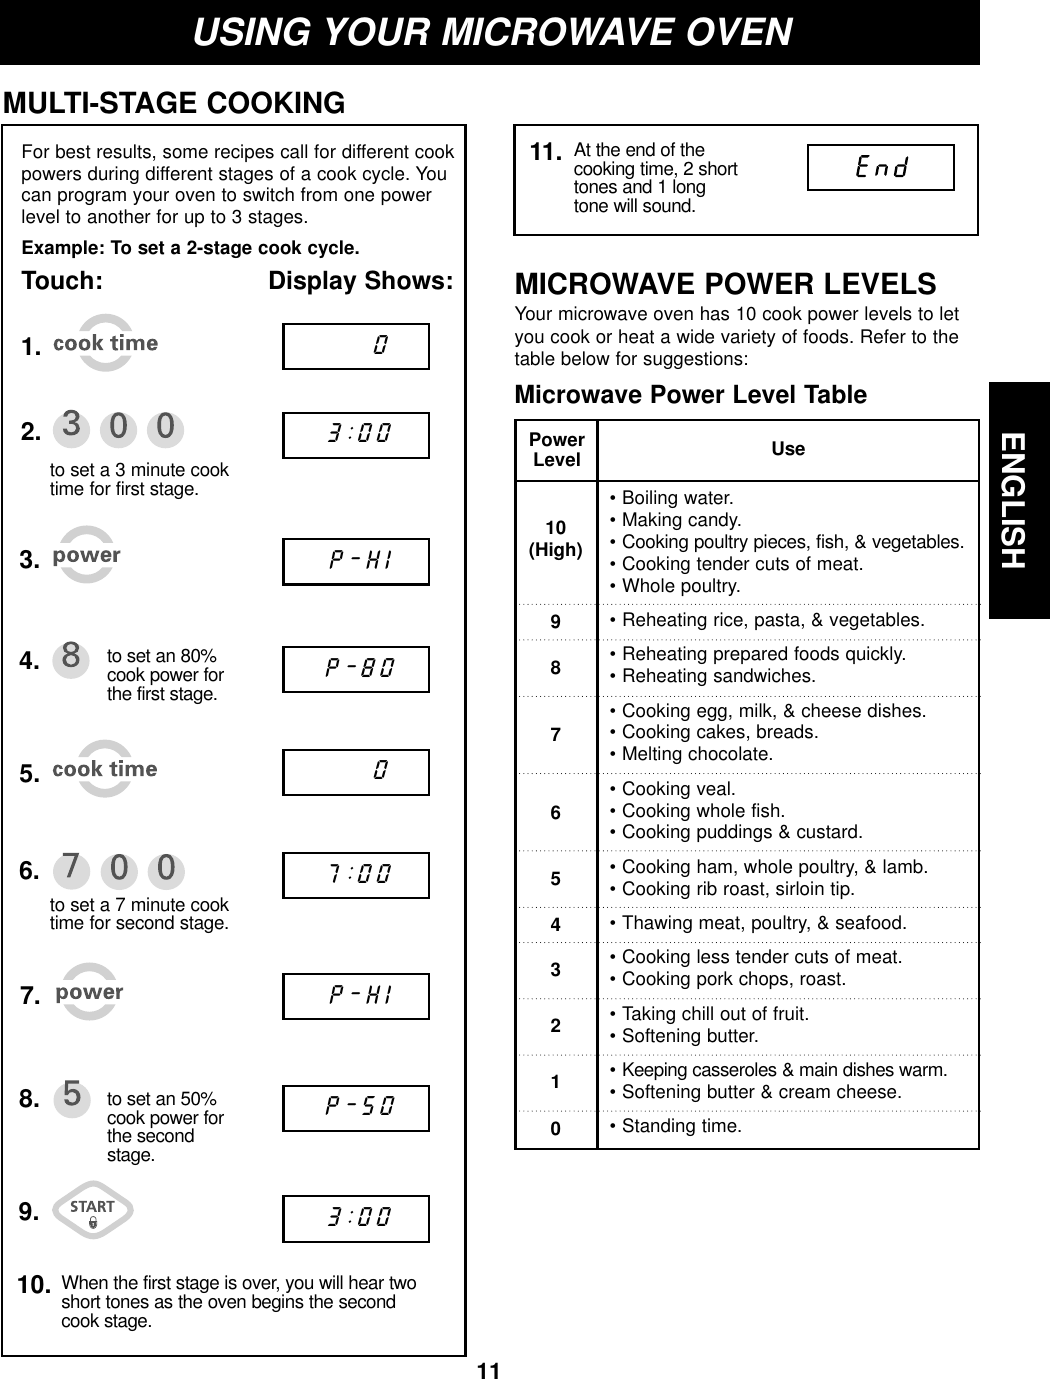 ENGLISH11USING YOUR MICROWAVE OVENMICROWAVE POWER LEVELSYour microwave oven has 10 cook power levels to letyou cook or heat a wide variety of foods. Refer to thetable below for suggestions:Microwave Power Level Table• Boiling water.• Making candy.• Cooking poultry pieces, fish, &amp; vegetables.• Cooking tender cuts of meat.• Whole poultry.• Reheating rice, pasta, &amp; vegetables.• Reheating prepared foods quickly.• Reheating sandwiches.• Cooking egg, milk, &amp; cheese dishes.• Cooking cakes, breads.• Melting chocolate.• Cooking veal.• Cooking whole fish.• Cooking puddings &amp; custard.• Cooking ham, whole poultry, &amp; lamb.• Cooking rib roast, sirloin tip.• Thawing meat, poultry, &amp; seafood.• Cooking less tender cuts of meat.• Cooking pork chops, roast.• Taking chill out of fruit.• Softening butter.• Keeping casseroles &amp; main dishes warm.• Softening butter &amp; cream cheese.• Standing time.10(High)9876543210UsePowerLevelFor best results, some recipes call for different cookpowers during different stages of a cook cycle. Youcan program your oven to switch from one powerlevel to another for up to 3 stages.Example: To set a 2-stage cook cycle.Touch: Display Shows:MULTI-STAGE COOKING1.2.5.3.4.6.to set a 7 minute cook time for second stage.to set a 3 minute cook time for first stage.7.9.8. to set an 50% cook power for the secondstage.to set an 80% cook power for the first stage.When the first stage is over, you will hear twoshort tones as the oven begins the secondcook stage.10.At the end of thecooking time, 2 shorttones and 1 longtone will sound.11.003 :0 07 :0 03 :0 0P -H IP -H IP -8 0P -5 0